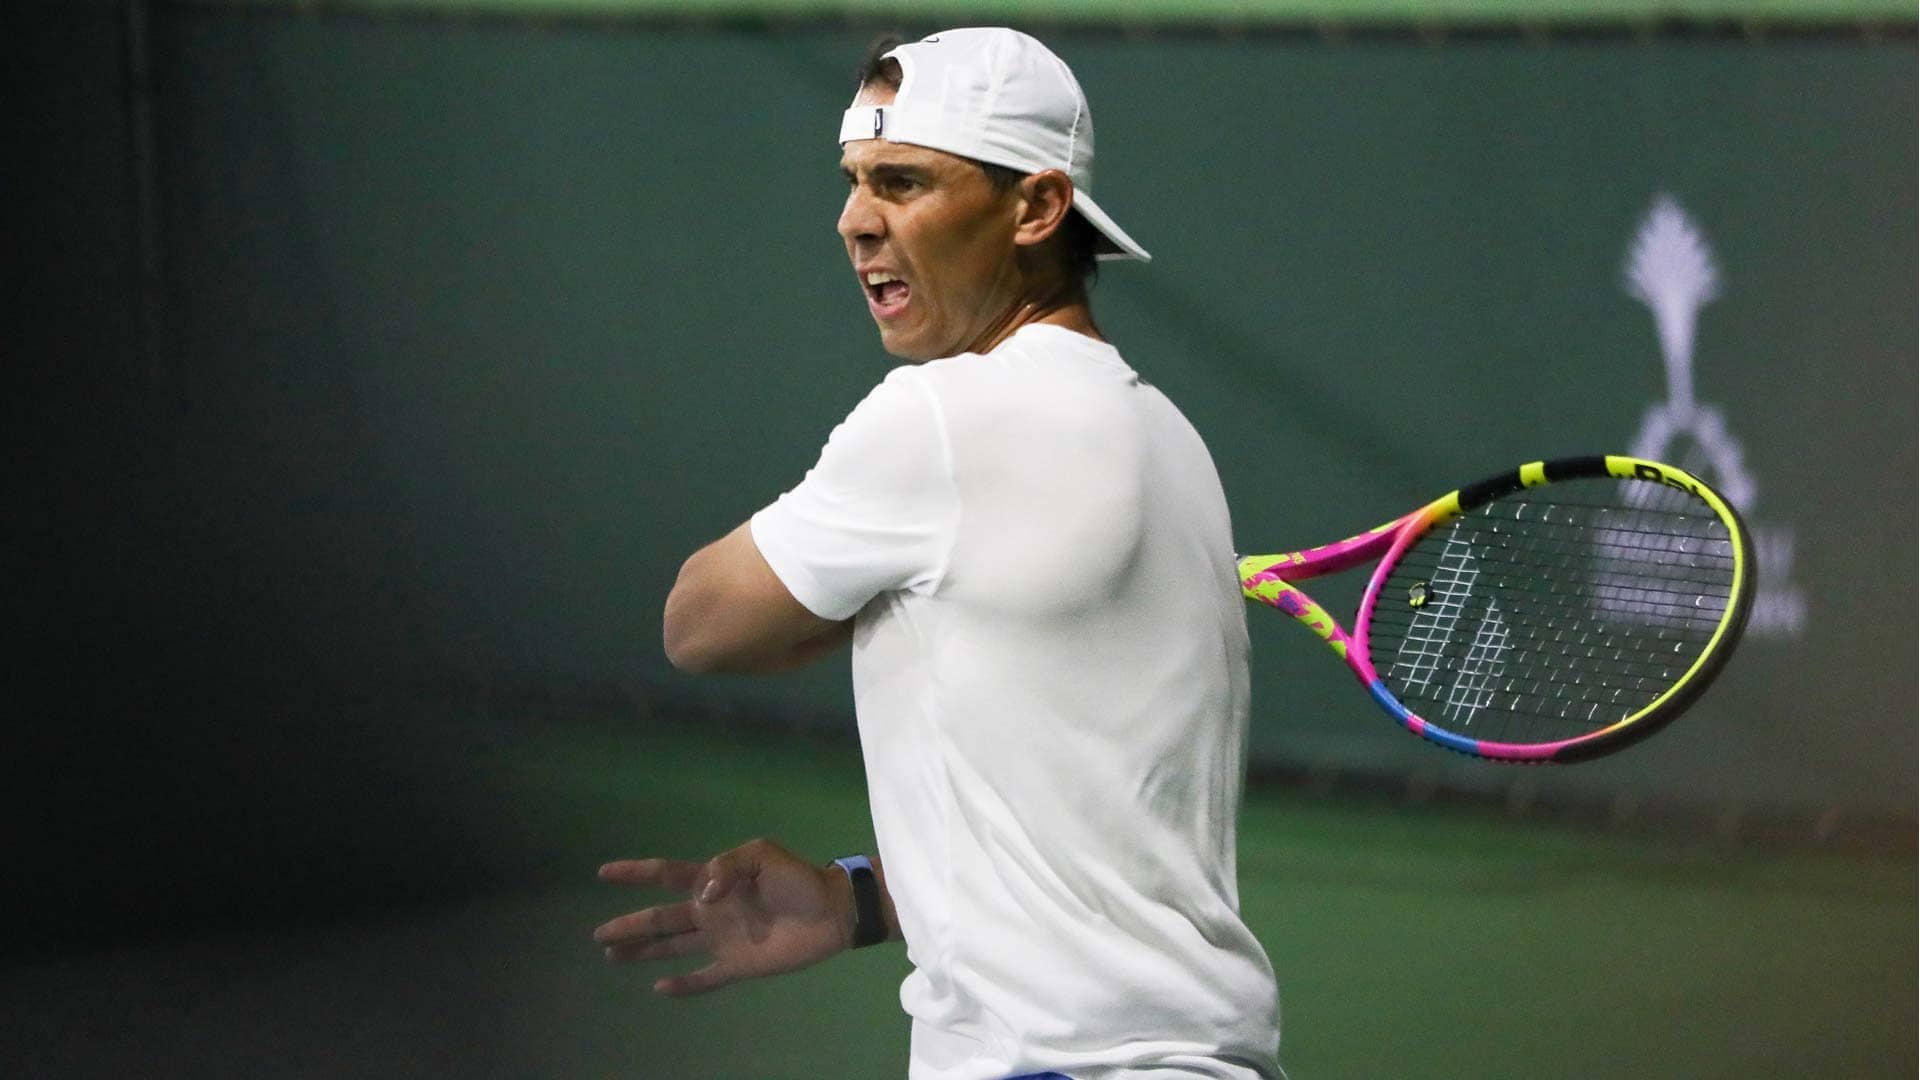 Rafael Nadal will be replaced in the Indian Wells draw by Sumit Nagal.